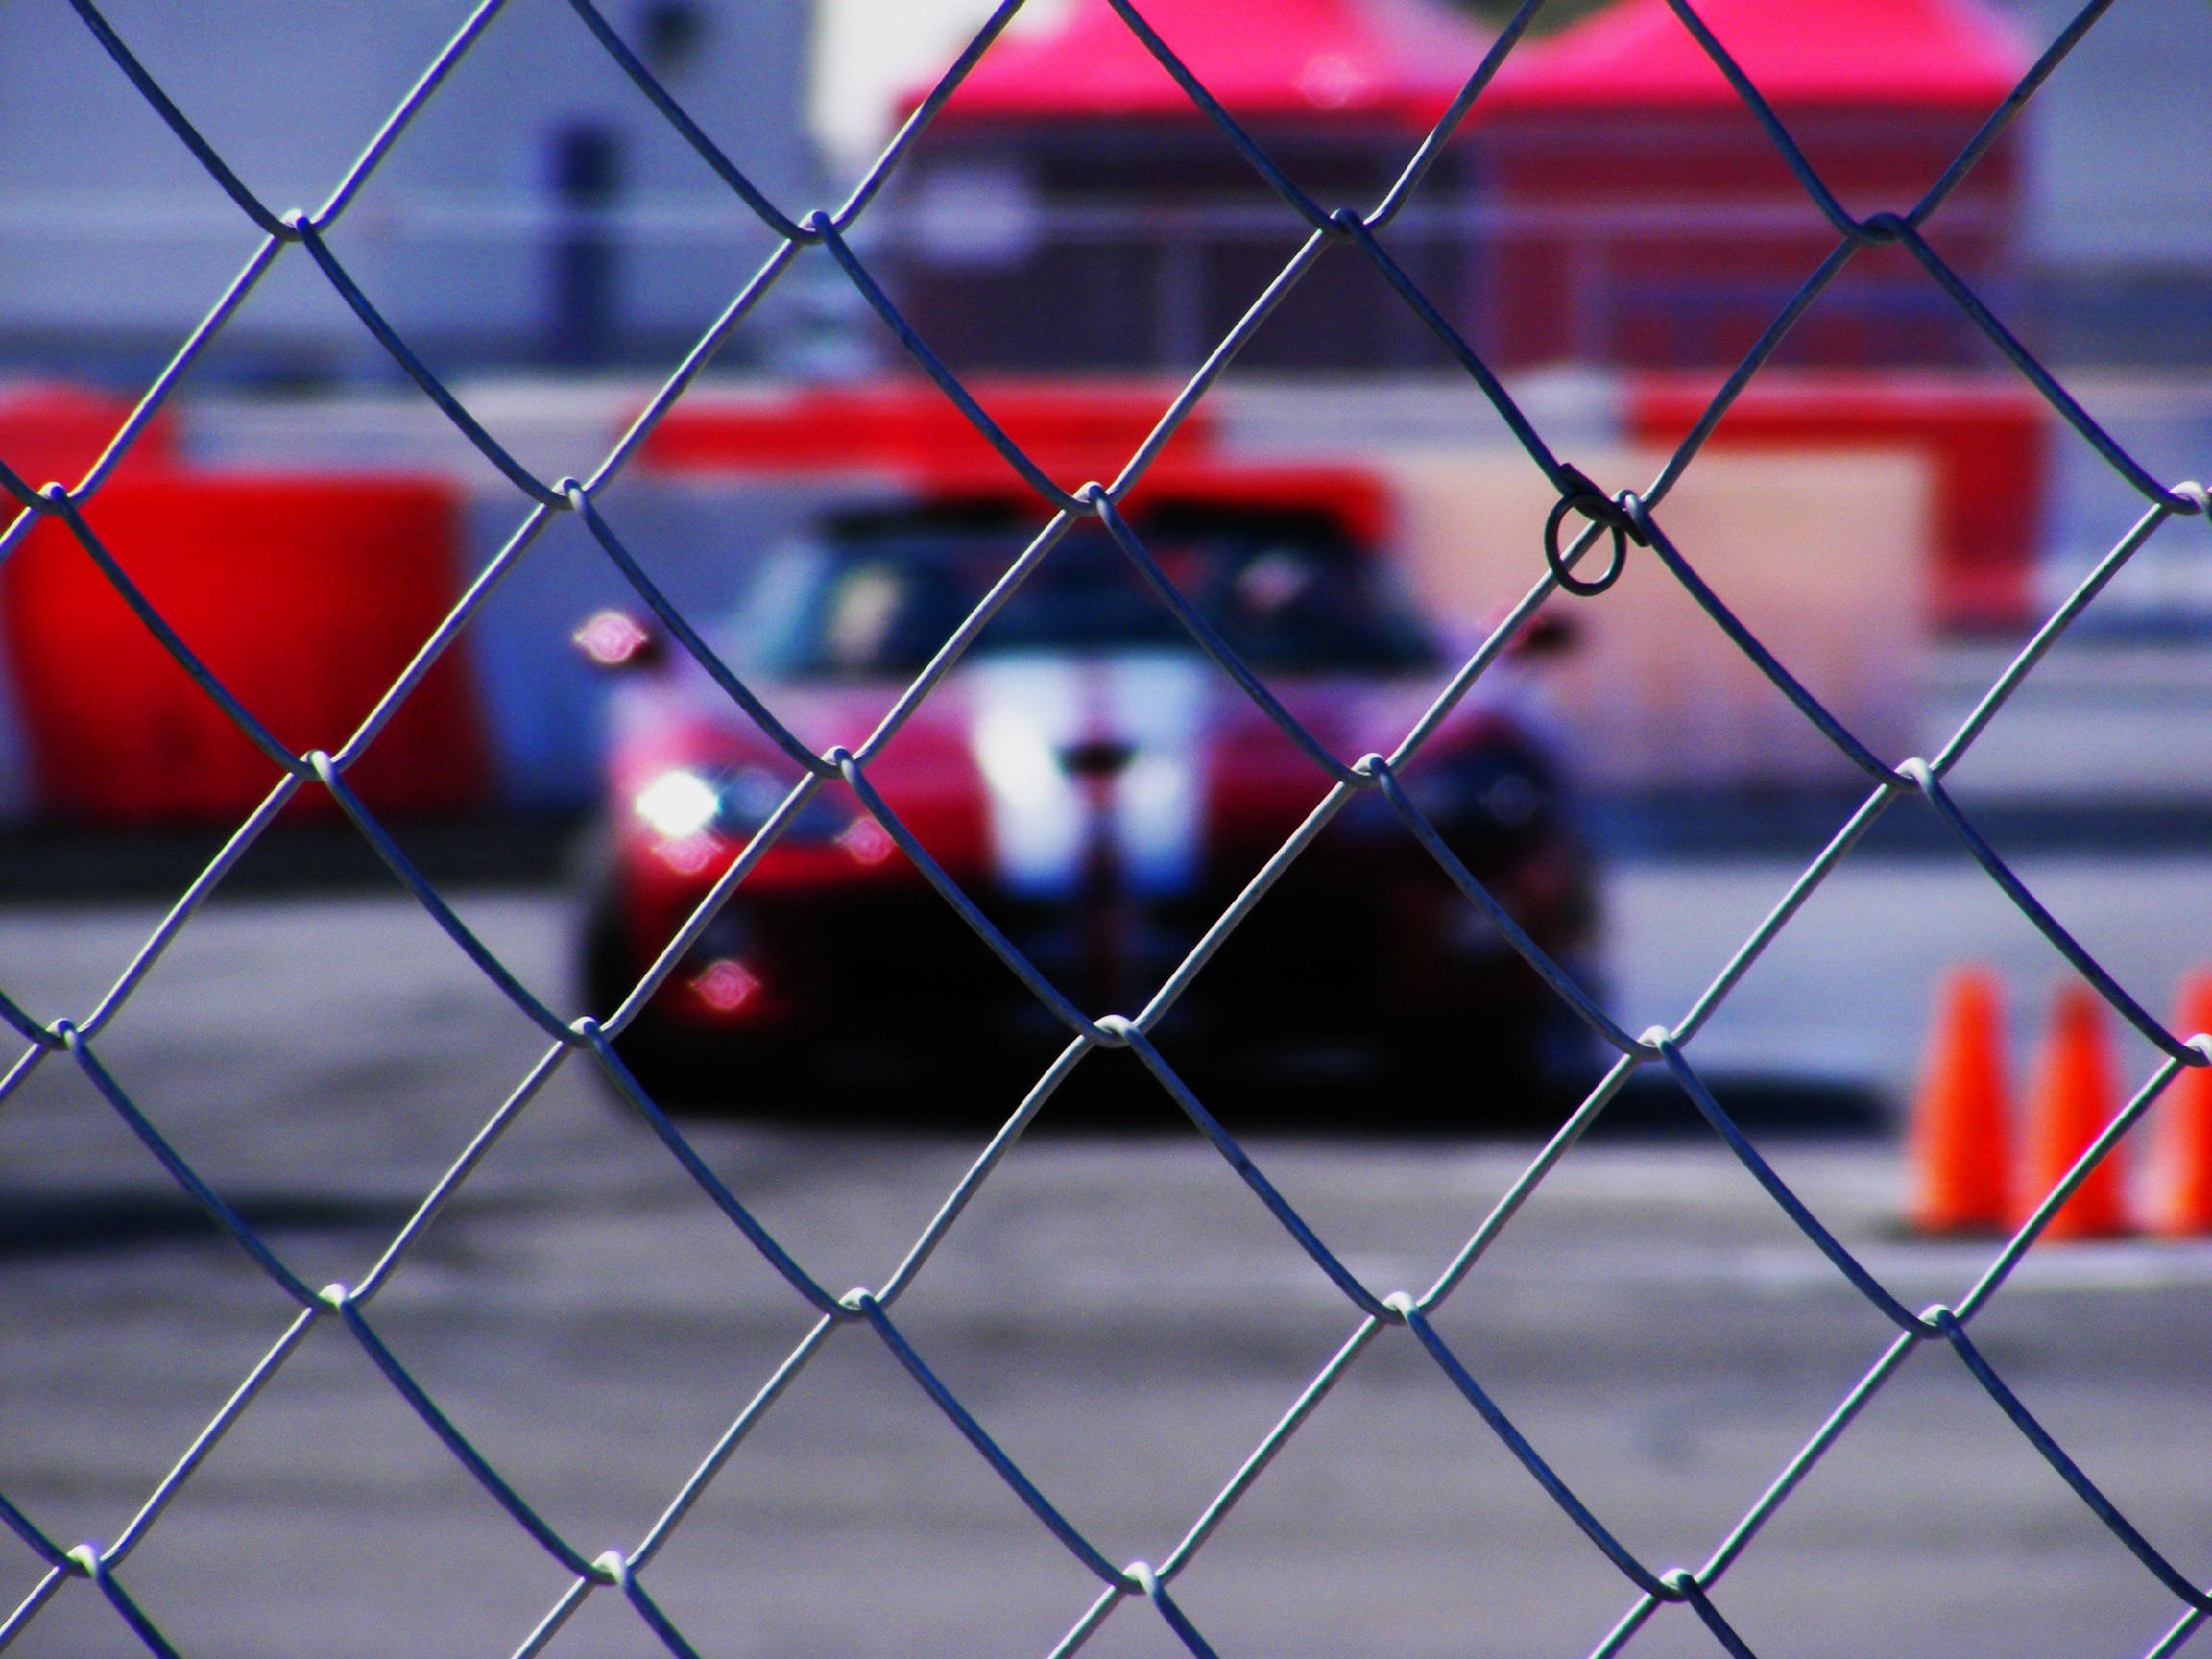 General 2304x1728 car chain-link fence depth of field vehicle red cars metal grid Dodge Dodge Viper racing stripes American cars Stellantis